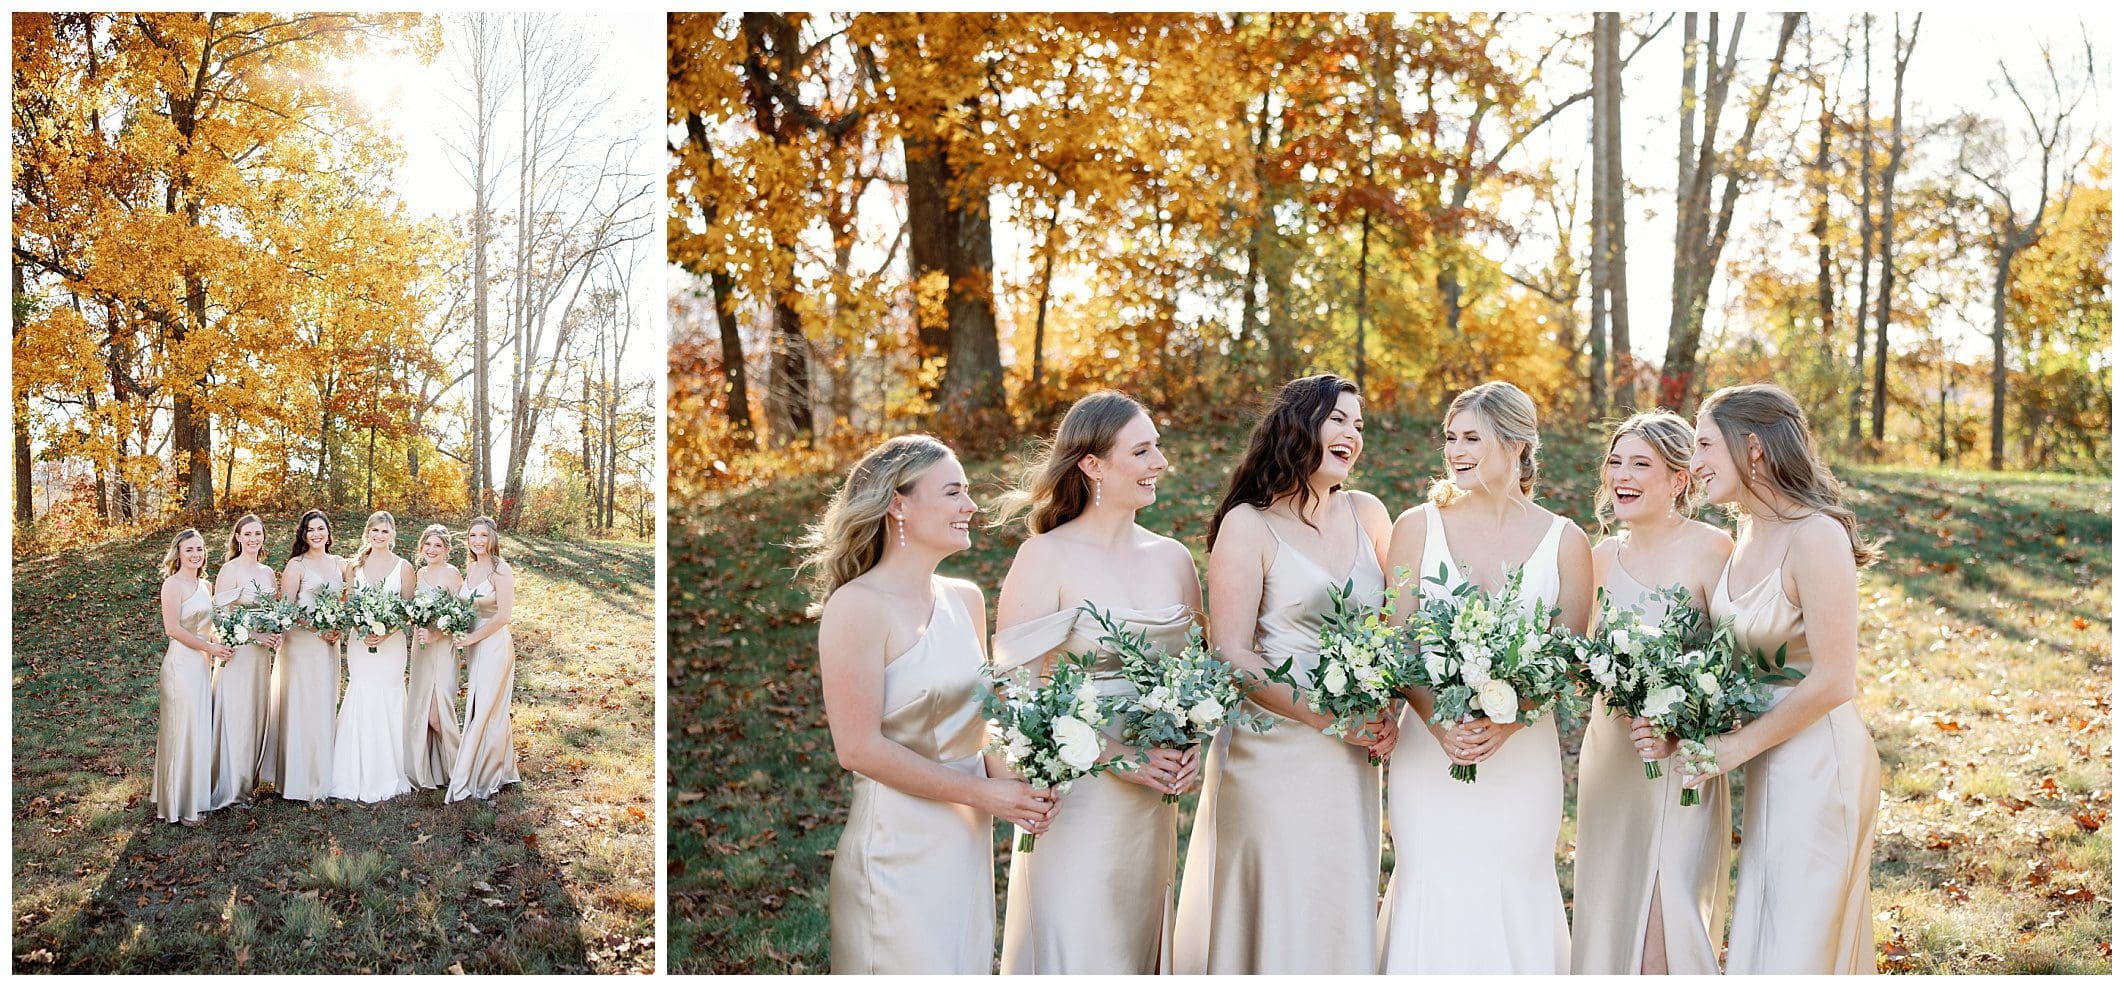 A bride and her bridesmaids in a field at the crest center for a fall wedding.